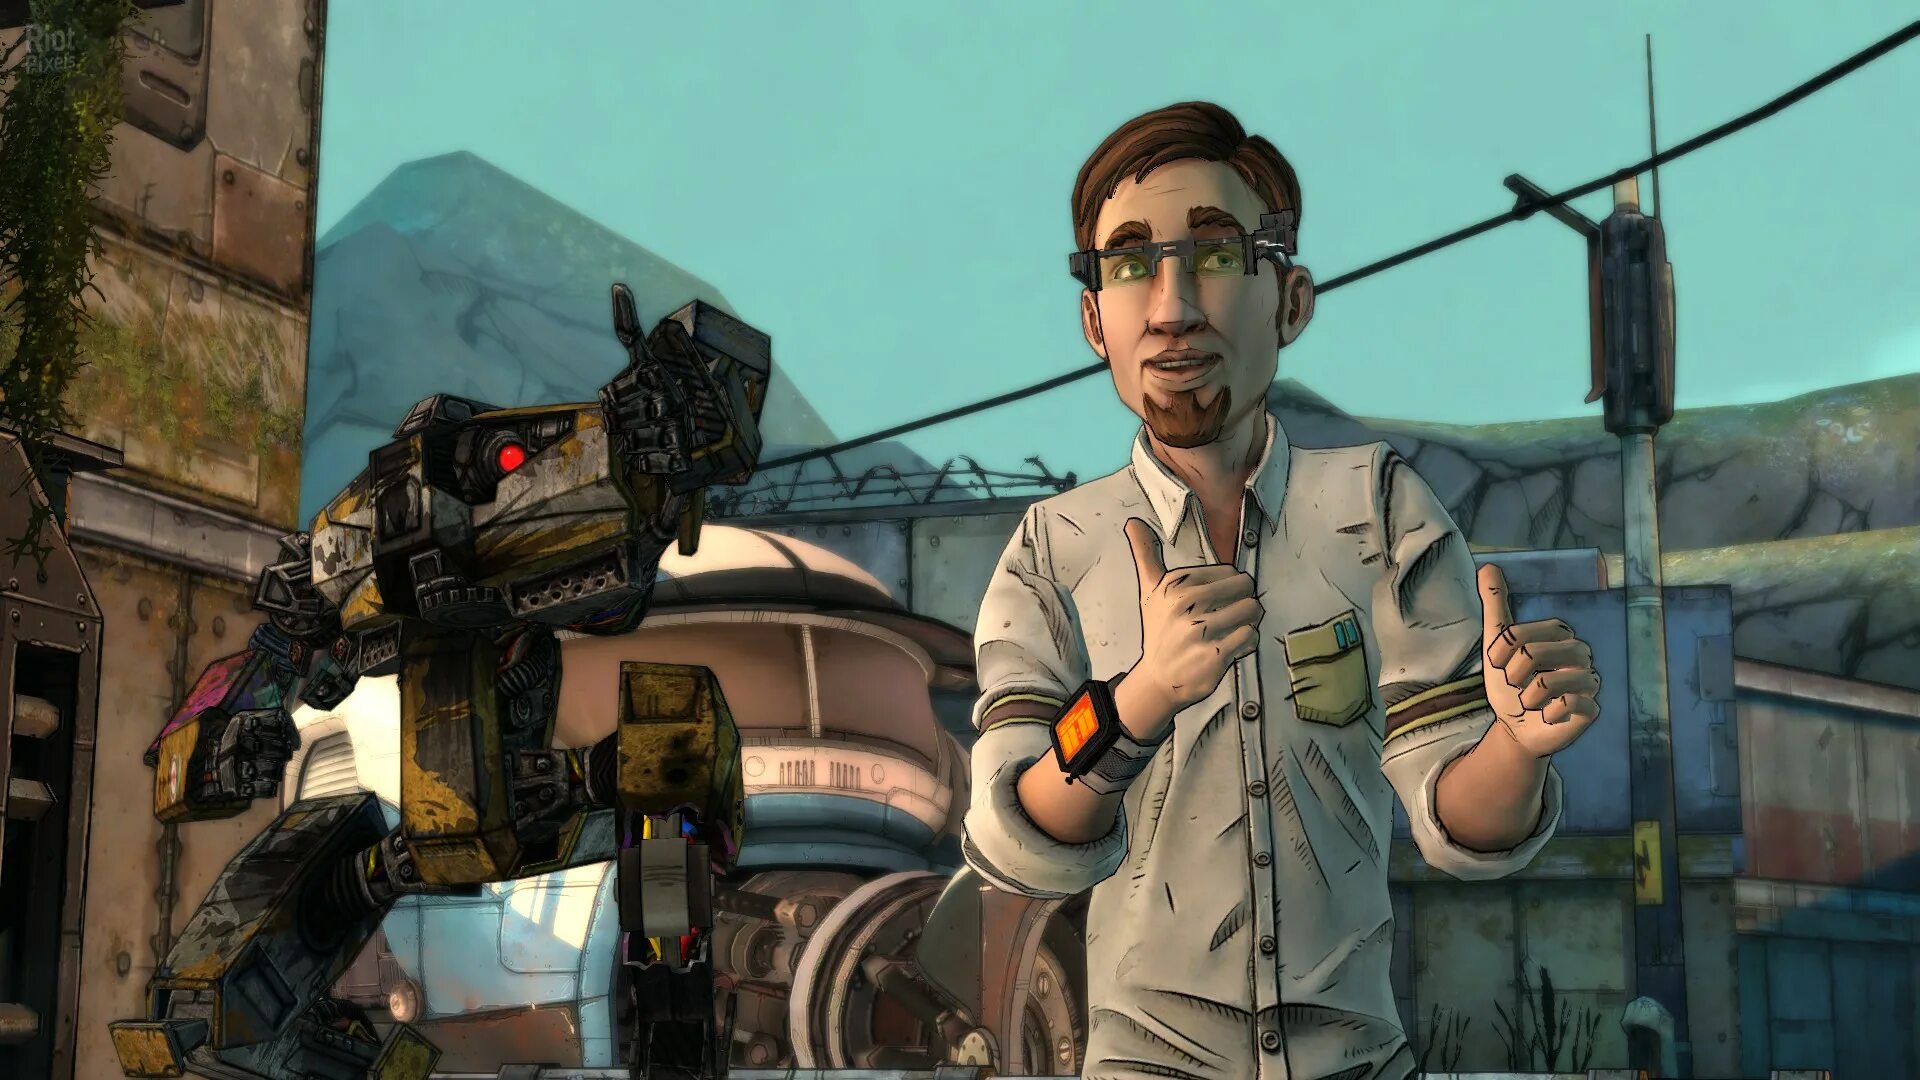 Tales from the Borderlands. Tales from the Borderlands вон. Риз бордерлендс. Tales from the Borderlands Vaughn.